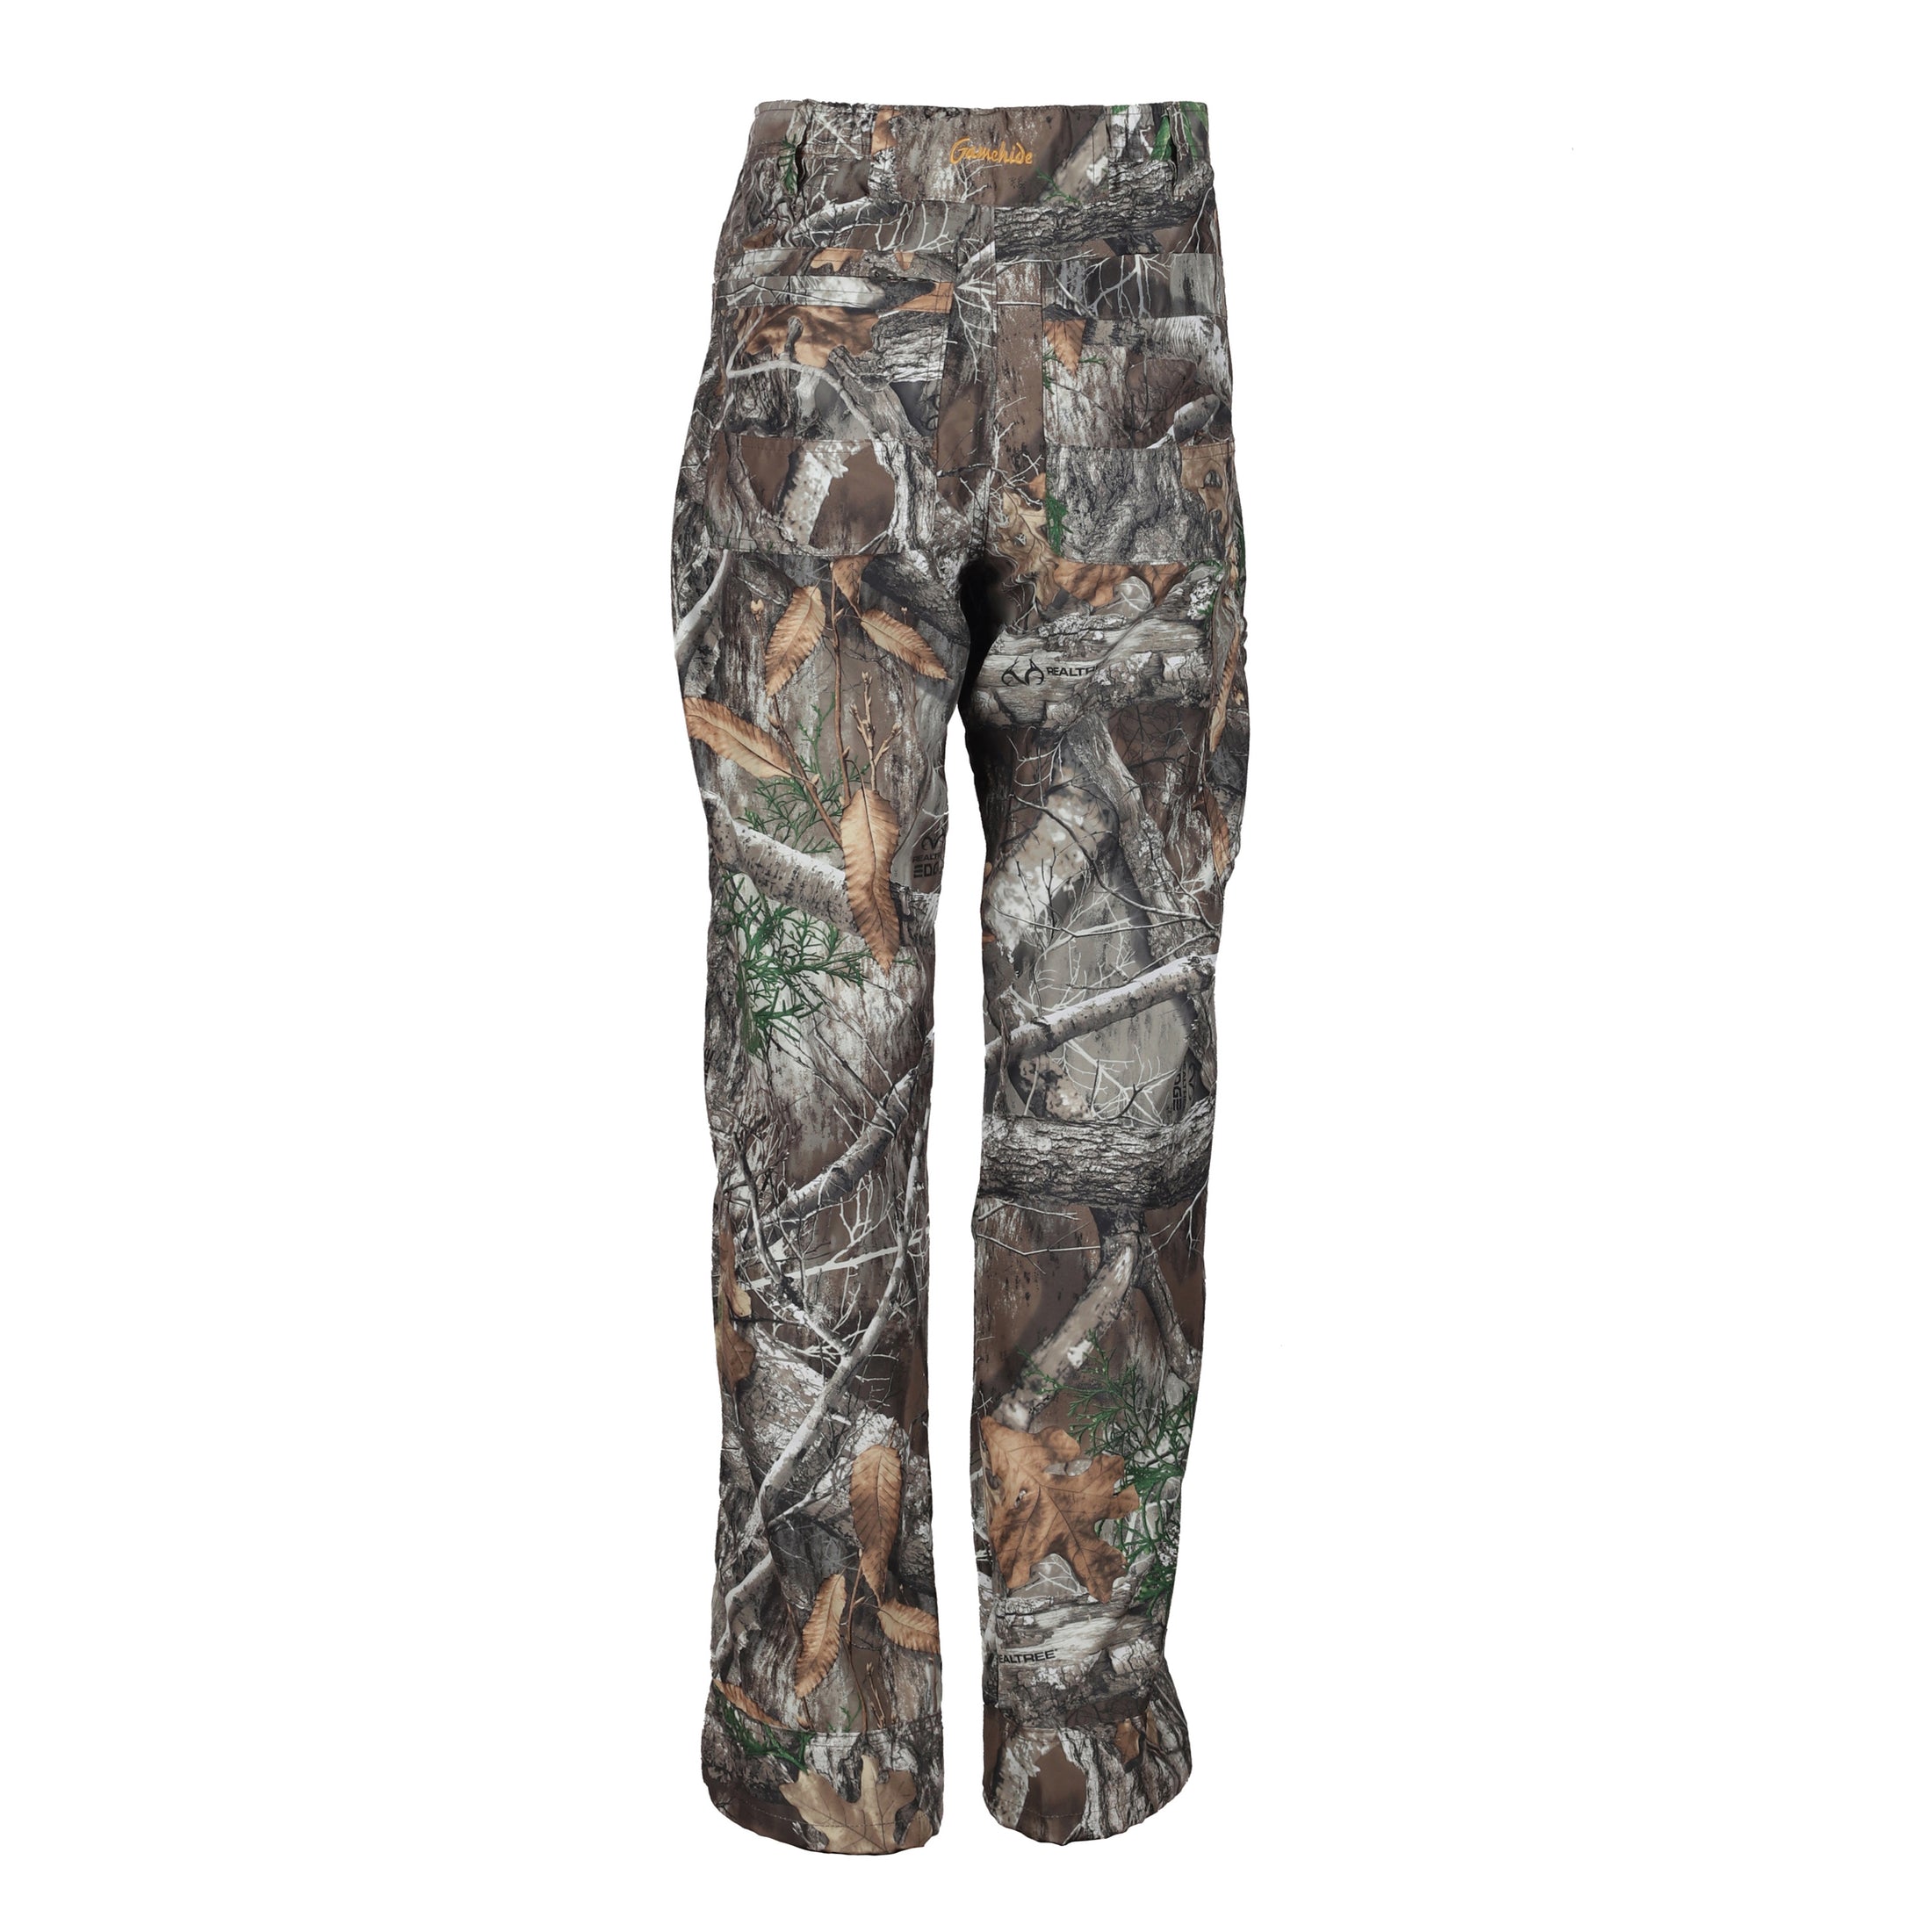 gamehide ElimiTick Insect Repellent Ultra Lite Pant back (realtree edge)